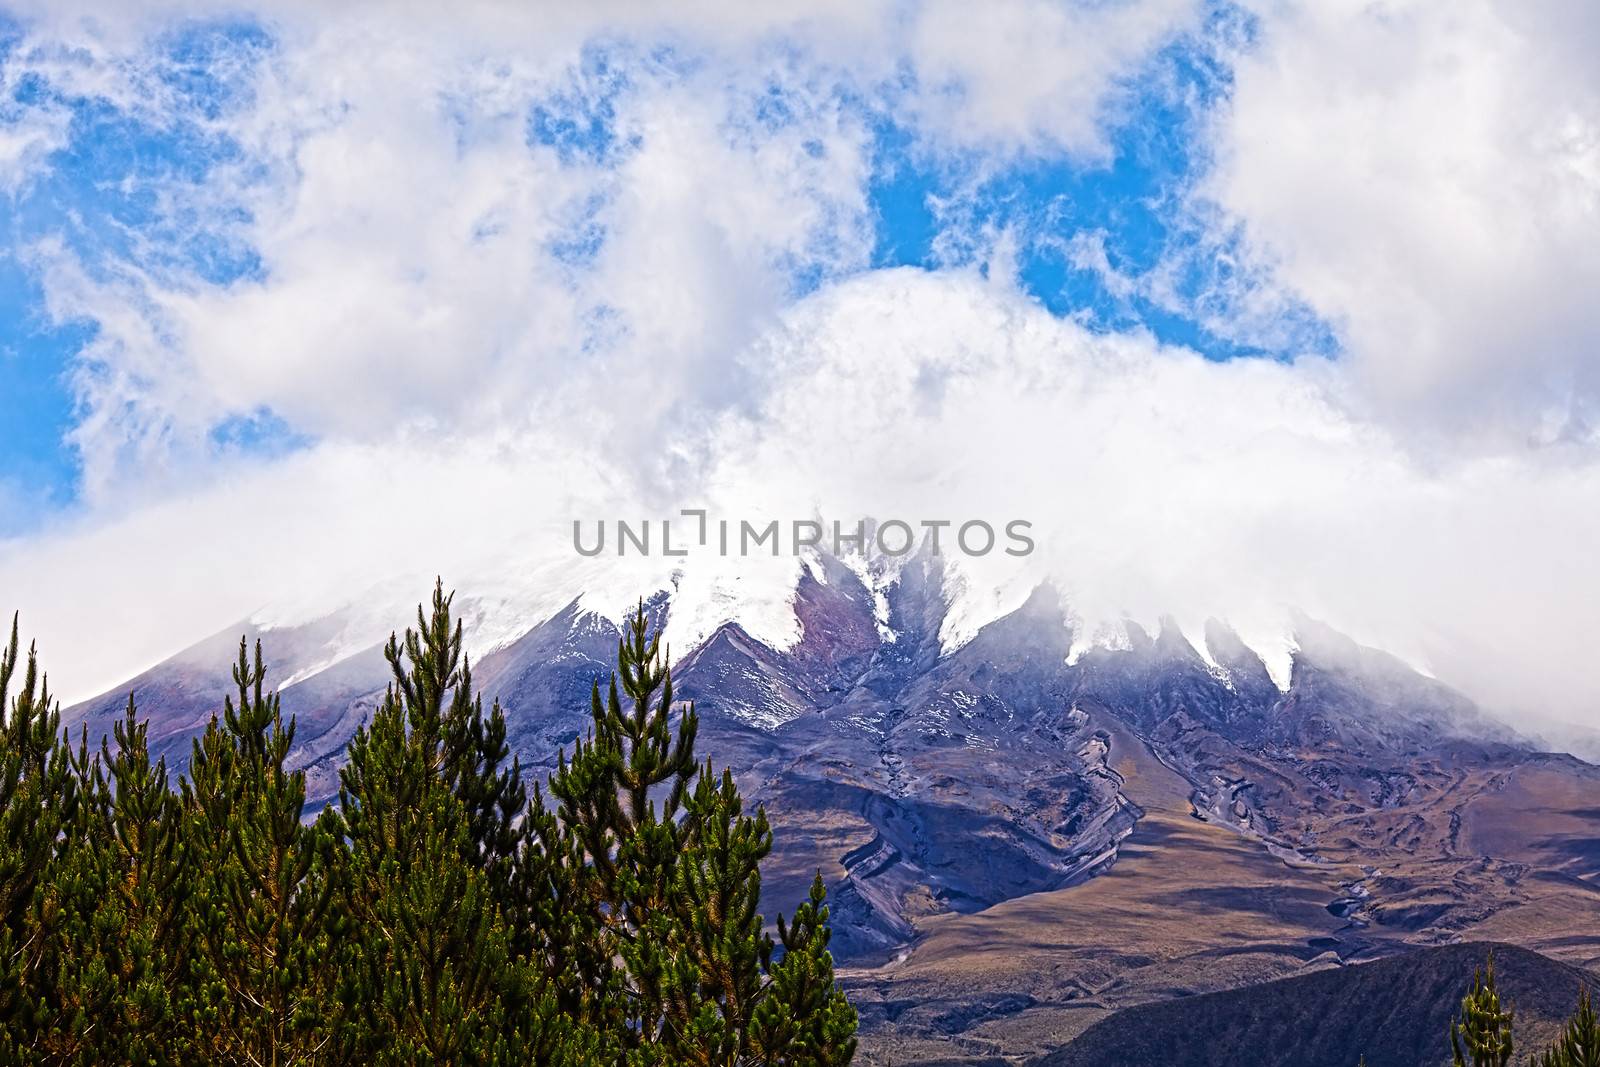 Cotopaxi Volcano in the background of blue sky and clouds